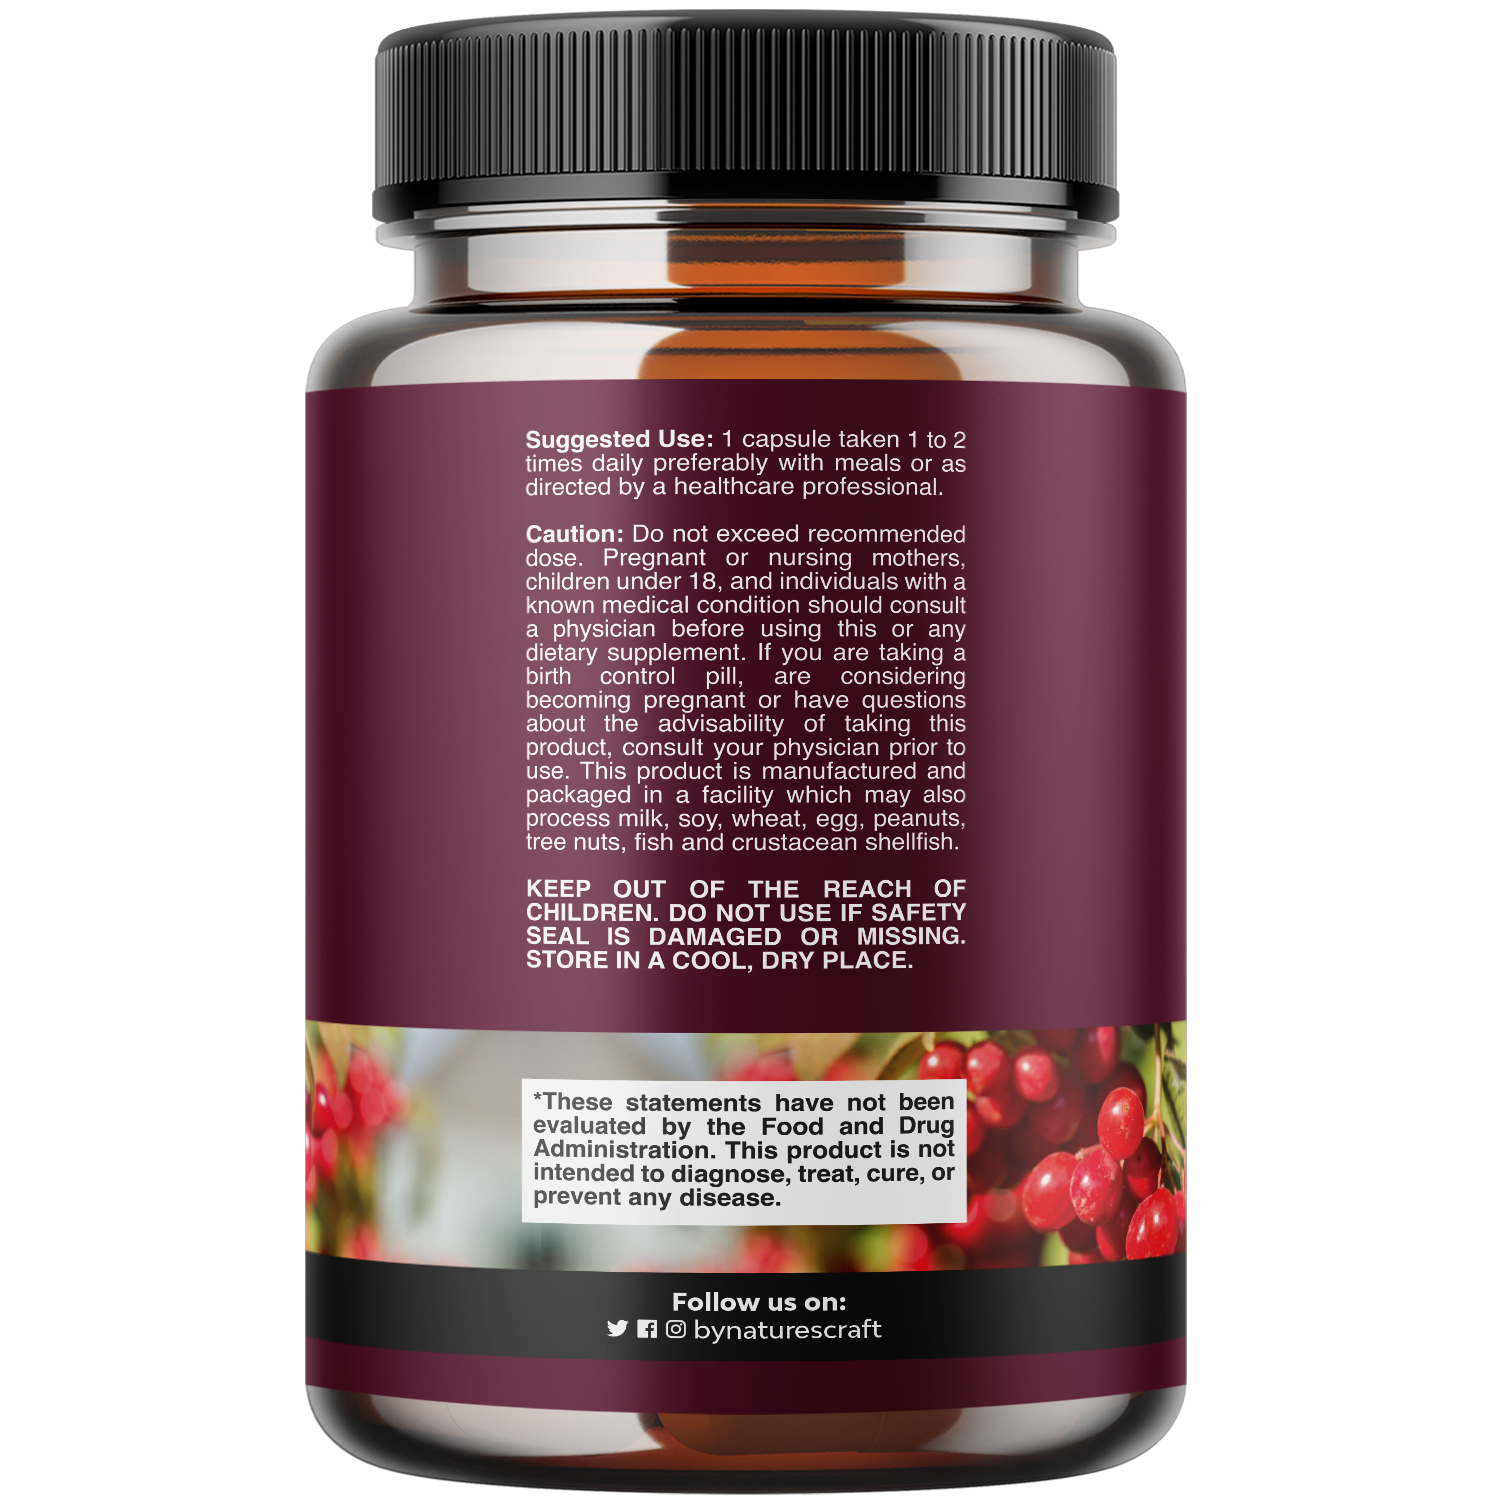 Kidney Support - 120 Capsules